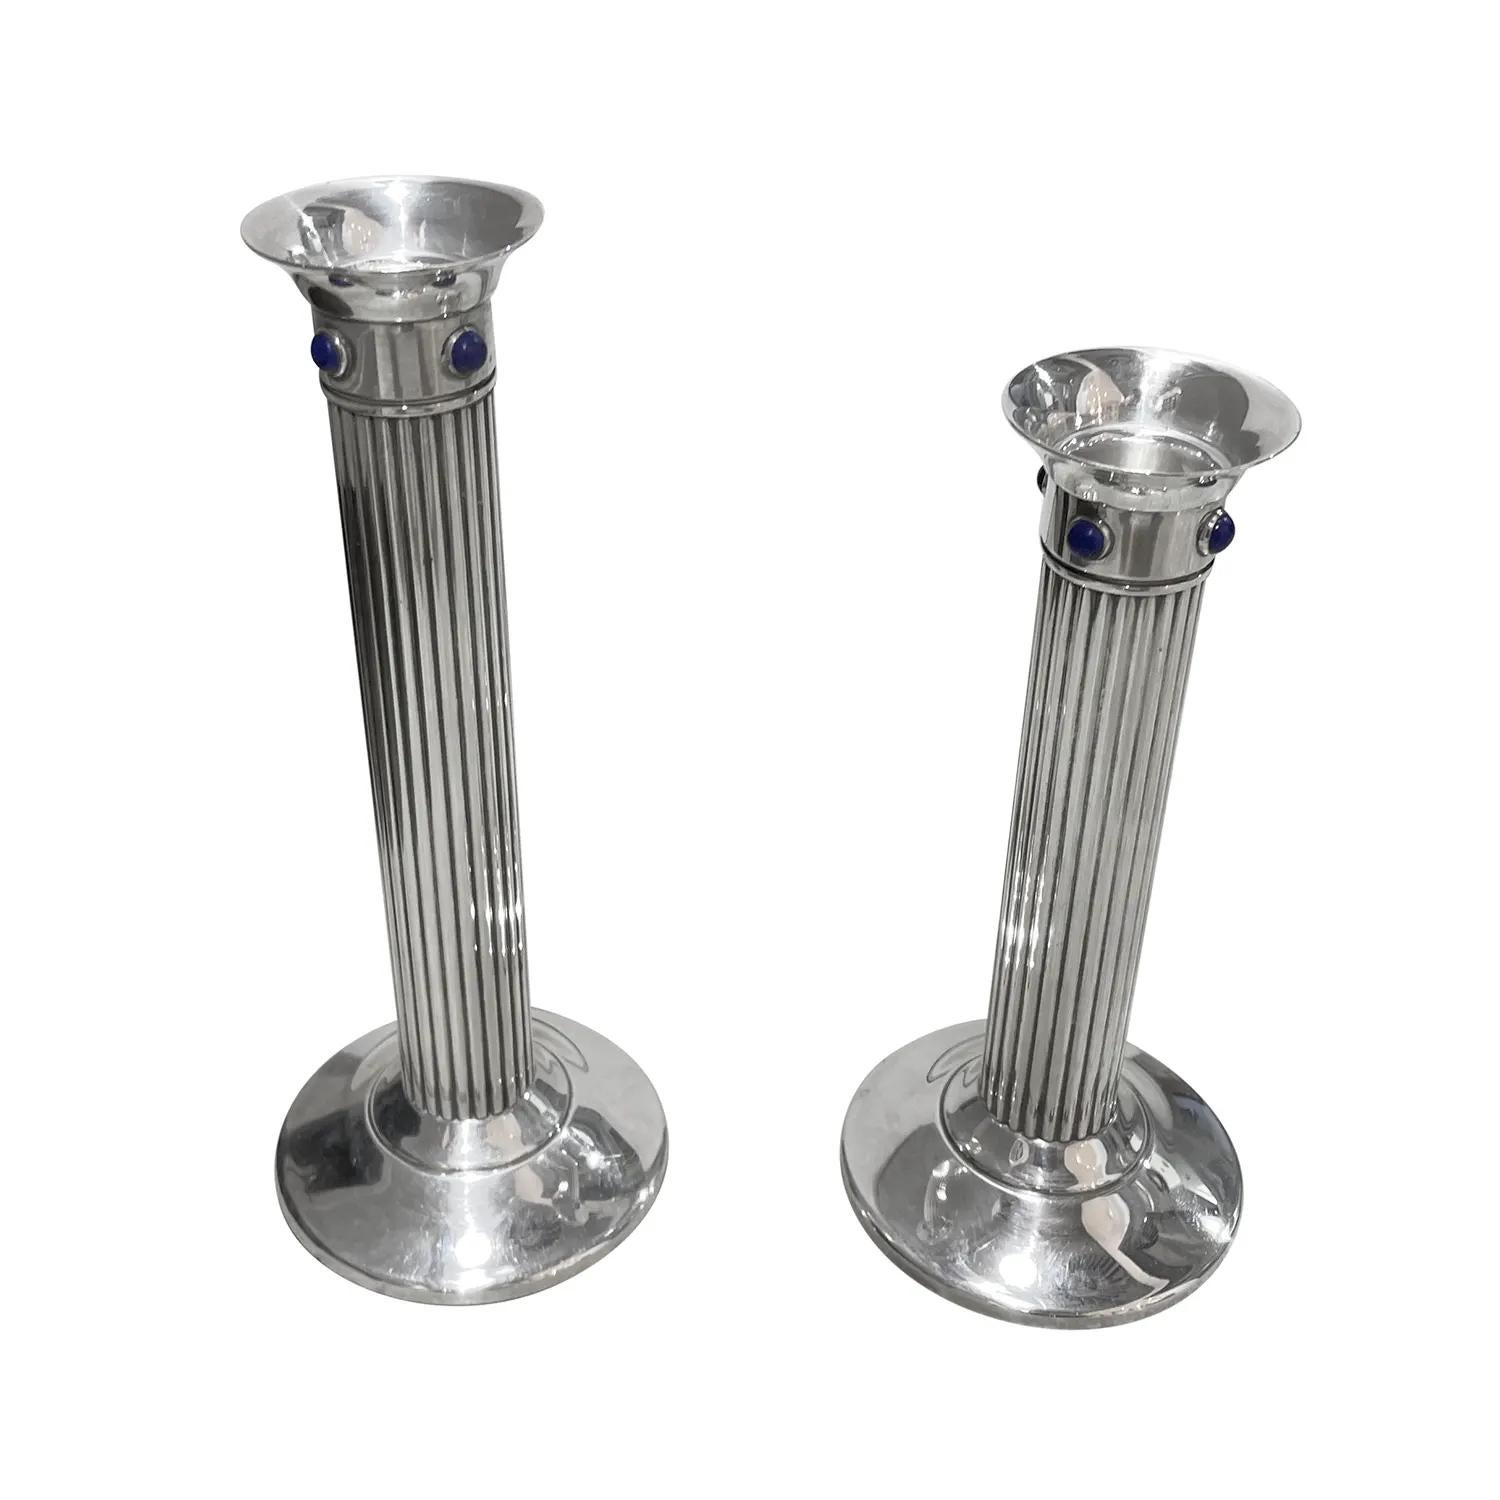 A vintage pair of candlesticks made of hand crafted silver-plated metal, sold by Cartier in good condition. The fluted pair of candle holders are enhanced by four detailed round lapis lazuli stones, supported by a round broad base and a ribbon. The